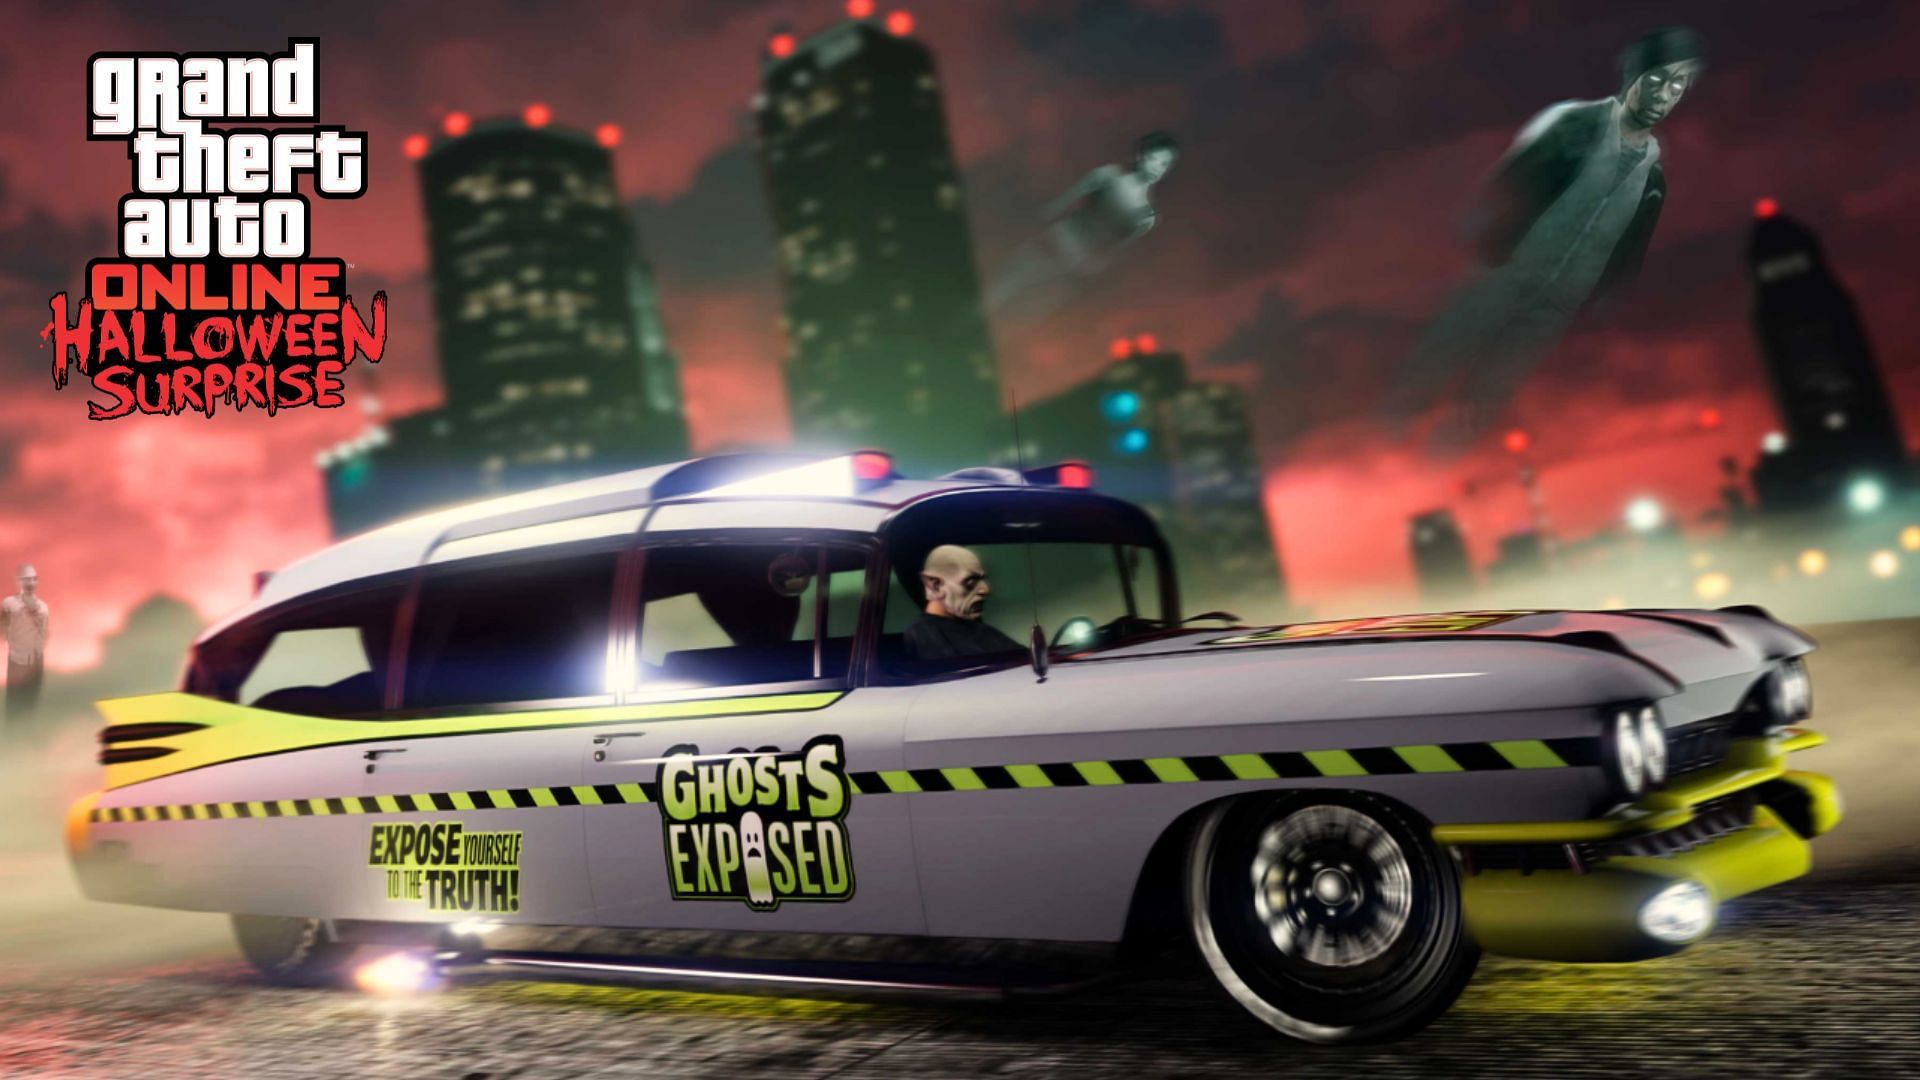 The Halloween mode events are now available for all players in GTA Online (Image via Rockstar Games)